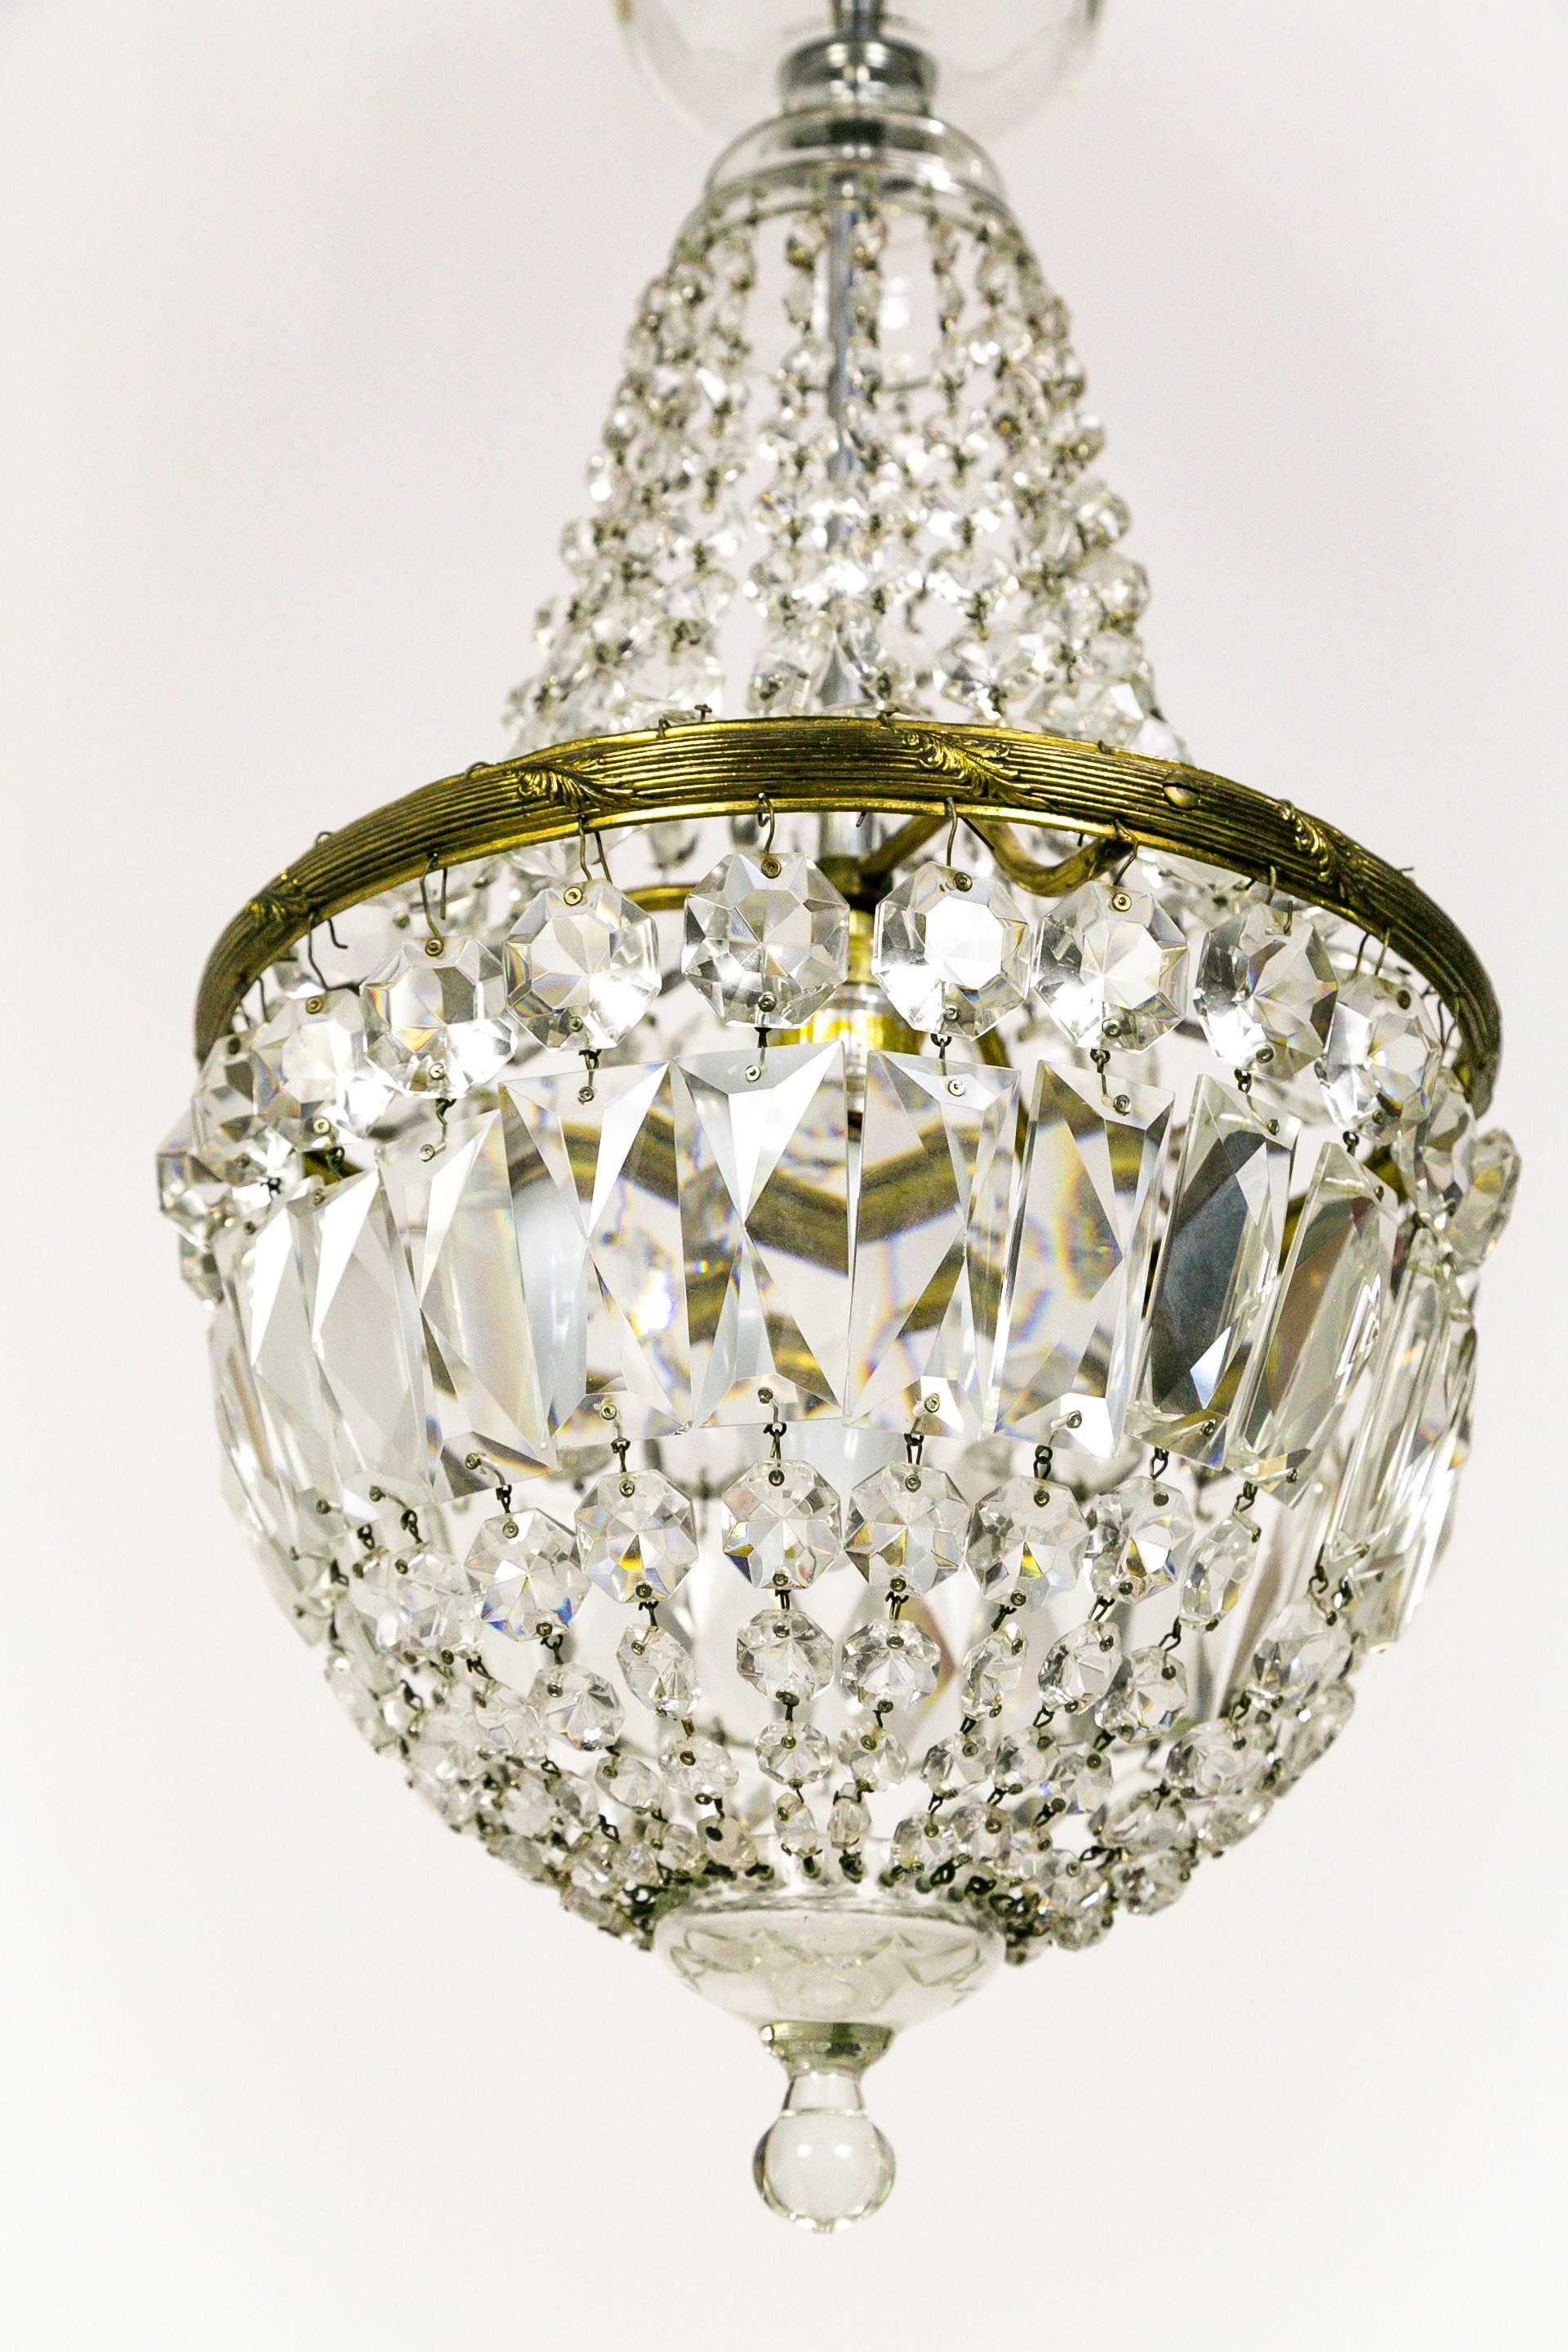 These Regency style chandeliers from the 1920s have radiant, closely placed crystal strands forming its basket shape. A stunning look with an intimate size. They have a glass crown bobesche and finial; and fine brass canopy and frame with delicate